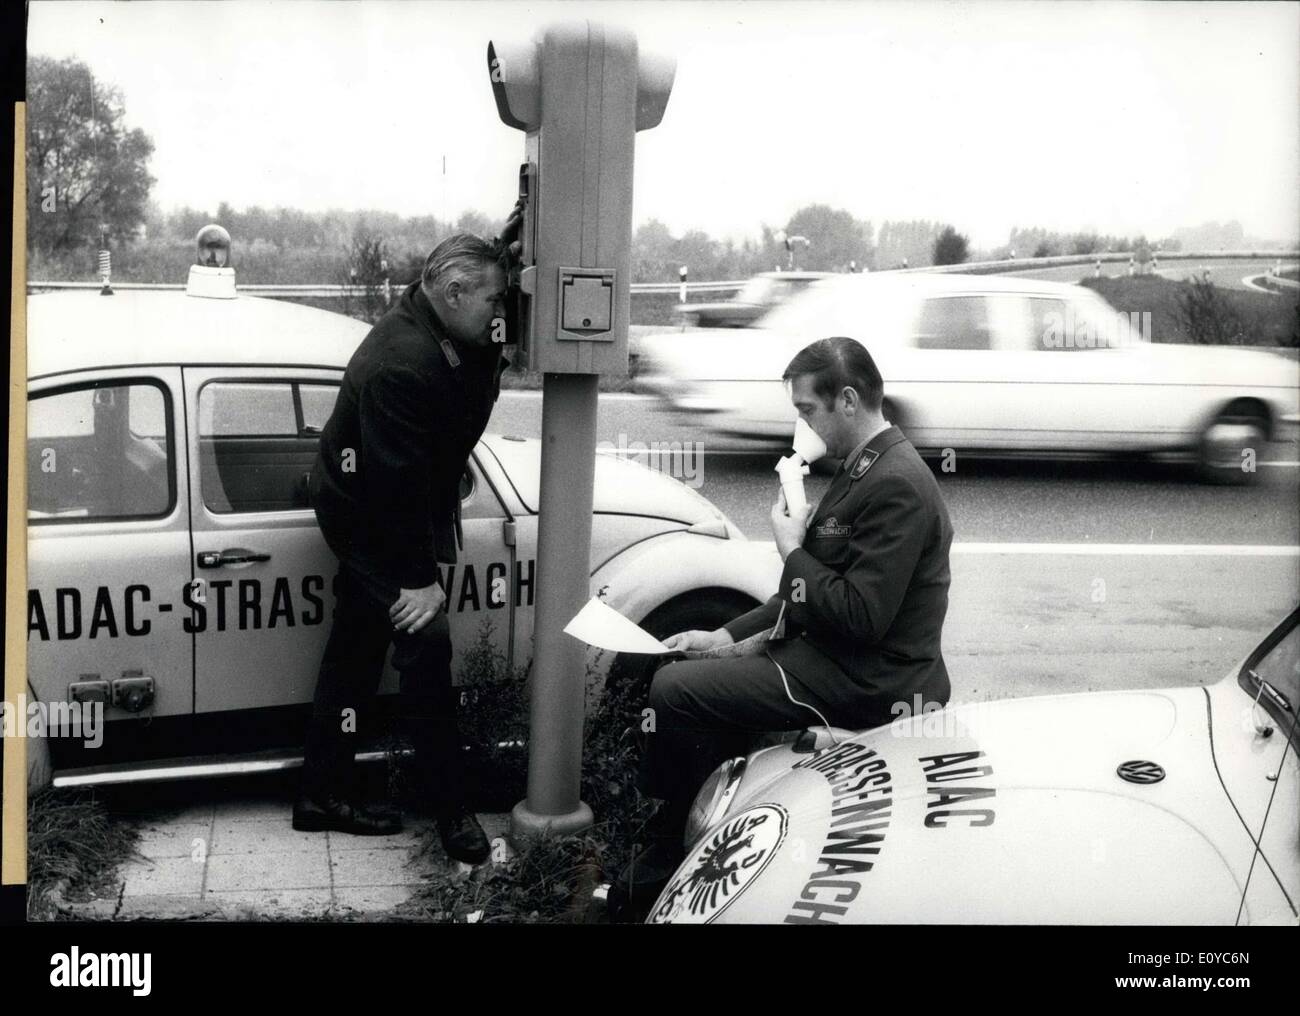 Oct. 29, 1969 - The drivers of the ADAC-Strassenwacht, or road patrol, are known as ''yellow angels.'' These cars patrol the streets of Germany in any condition, whether it be snow or rain or shine, in order to help in cases like accidents or car breakdowns. Here one is aiding a man with a mask. There are around 500 of them on duty, they have helped in over 372,265 cases, and they have driven a collective 12,000,000 km. Stock Photo